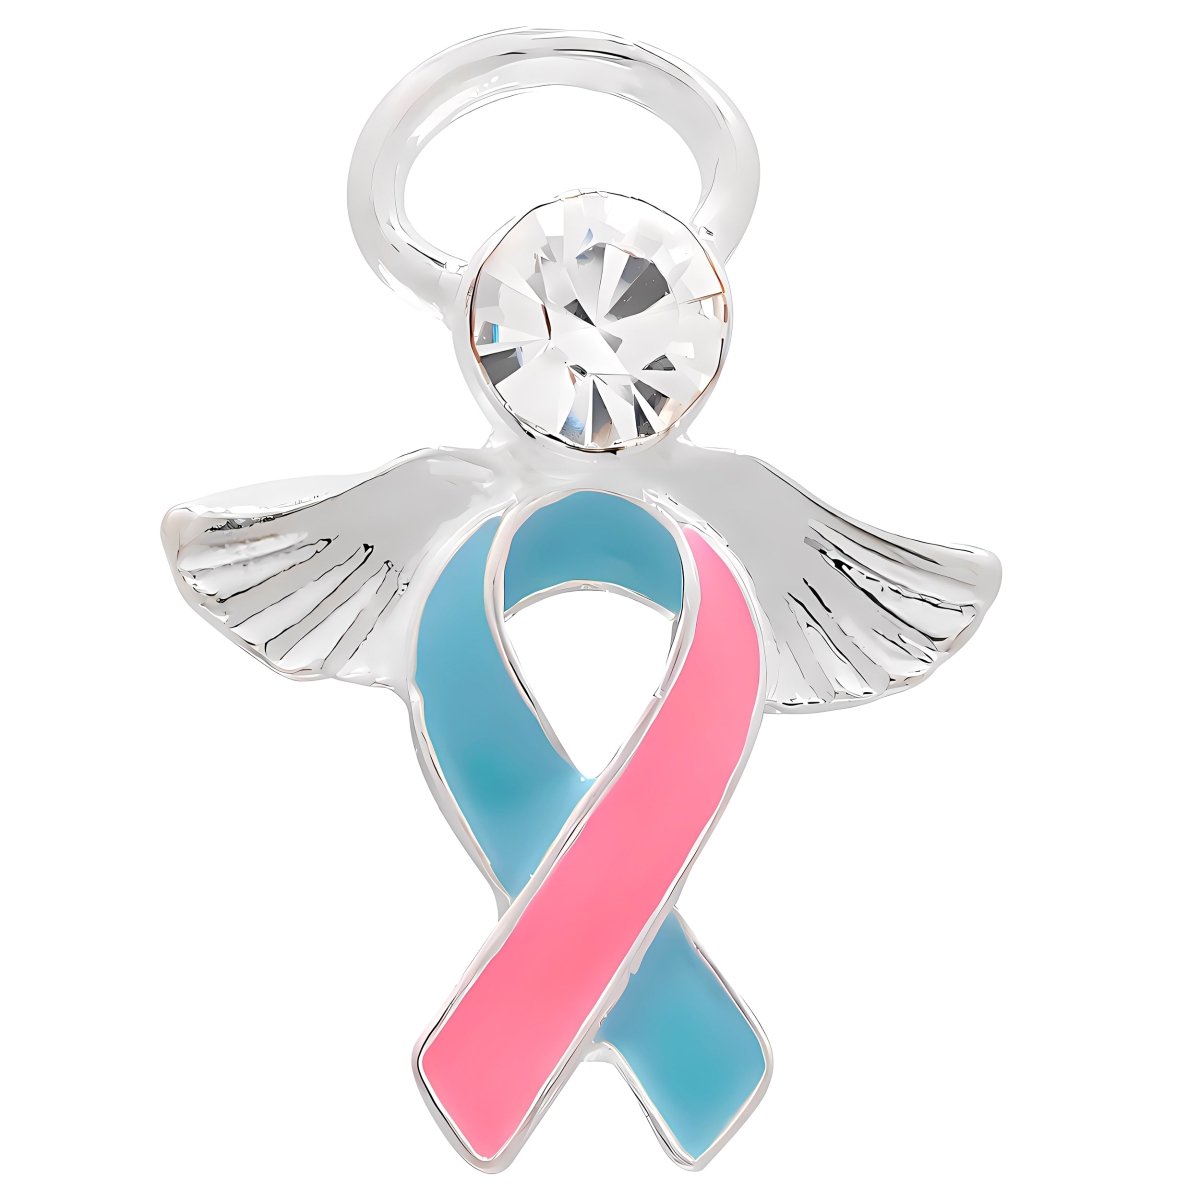 SIDS Awareness Angel Pins - Fundraising For A Cause